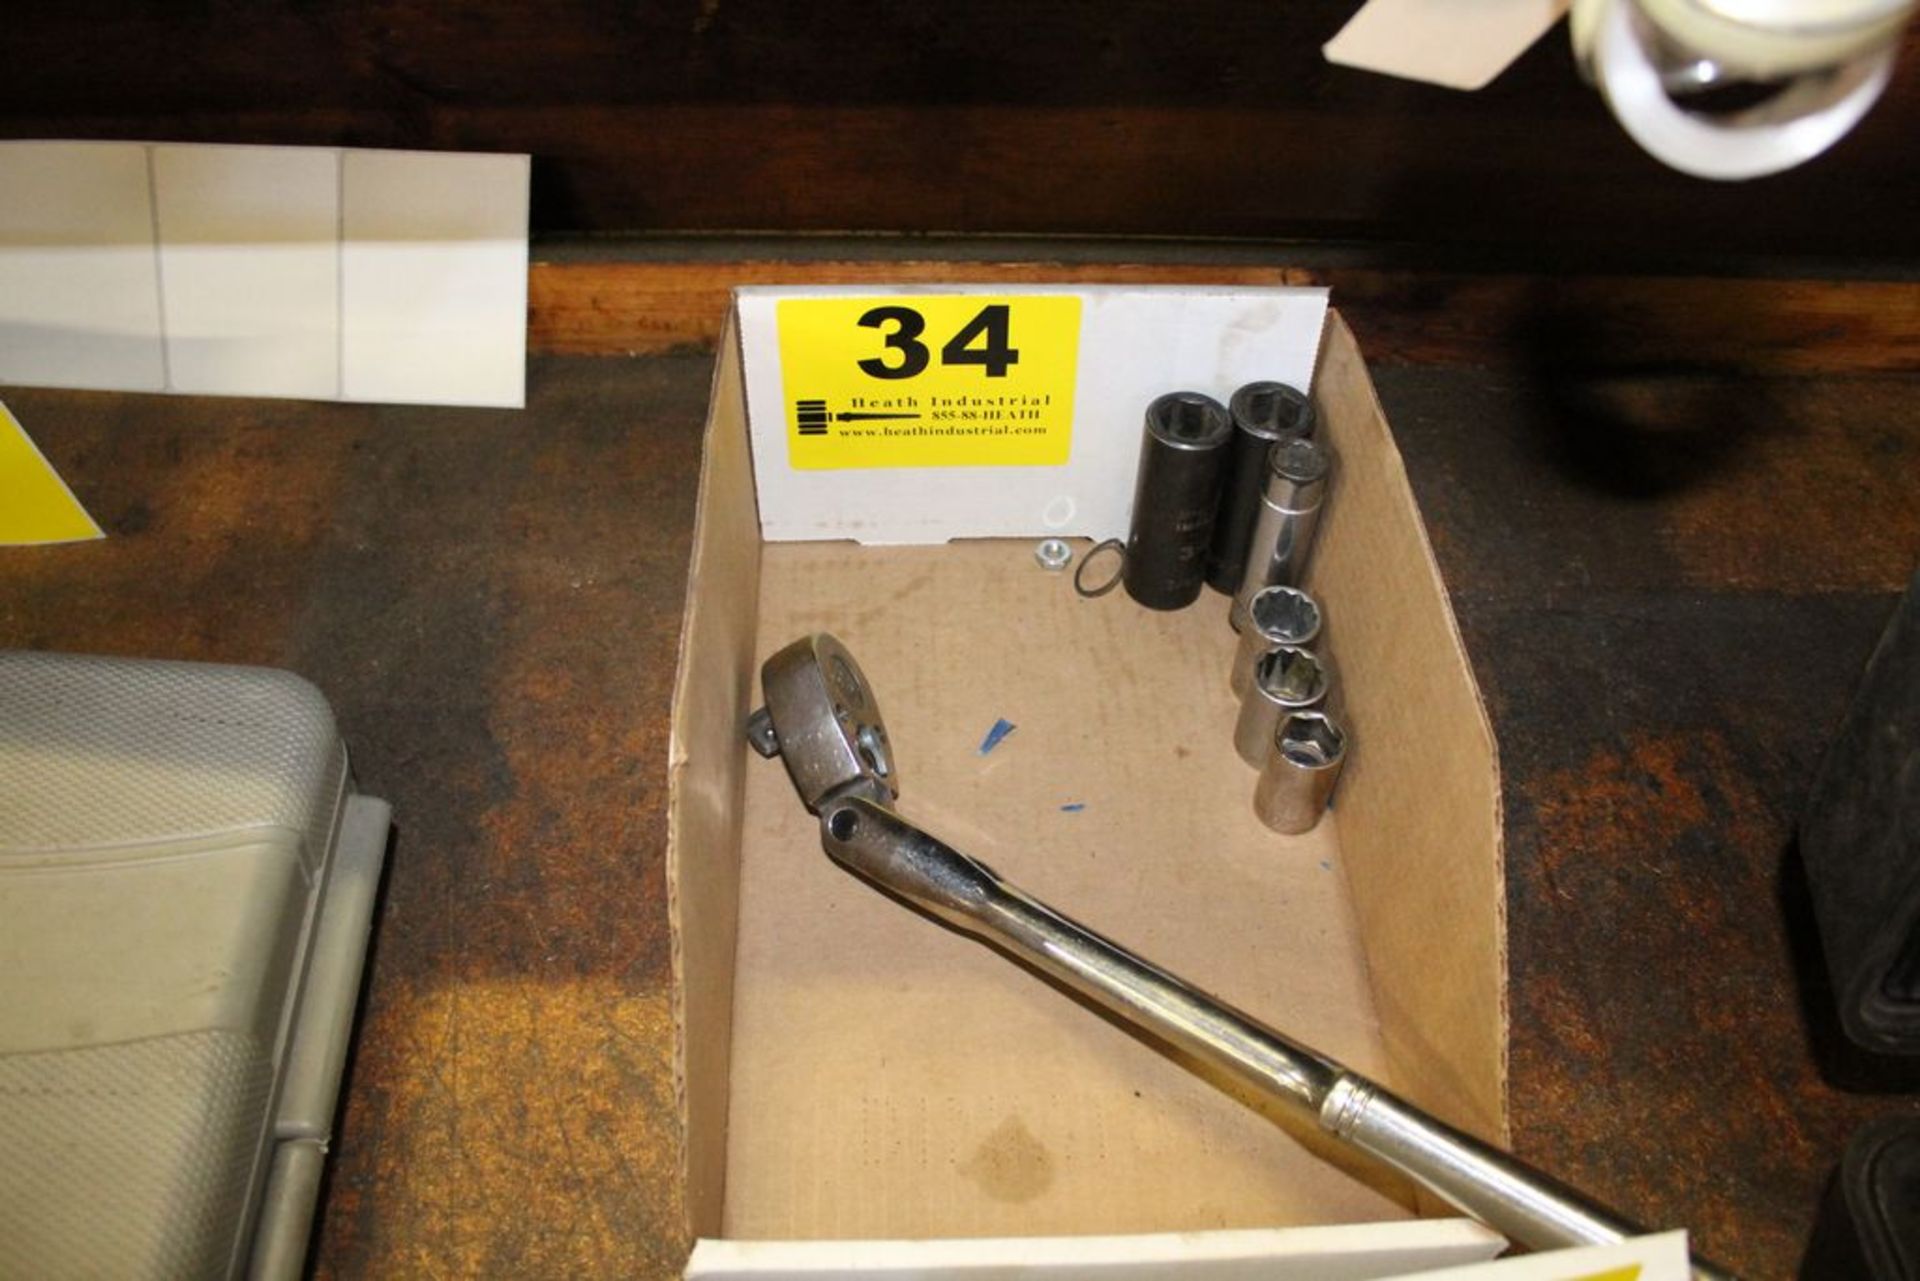 1/2" DRIVE SOCKET WRENCH AND SOCKETS IN BOX